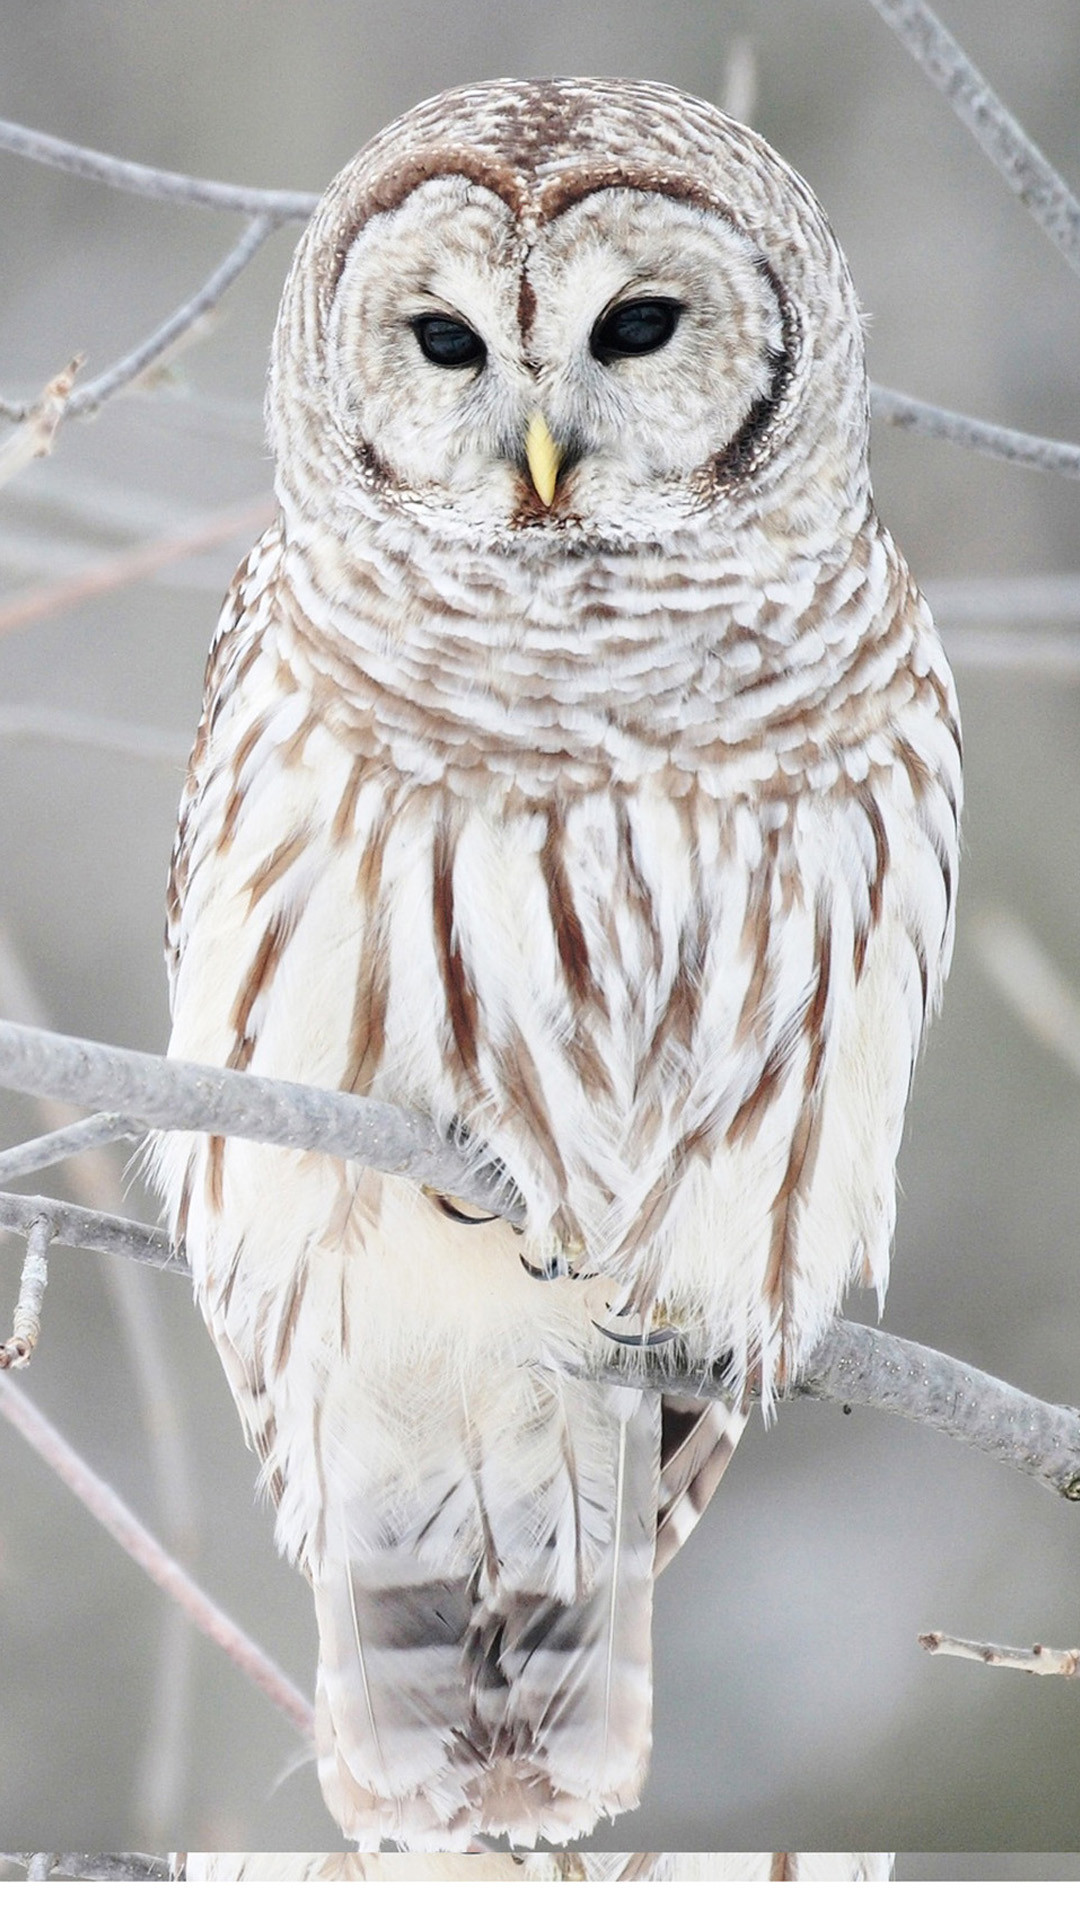 1080x1920, Download - Iphone White Owl - HD Wallpaper 